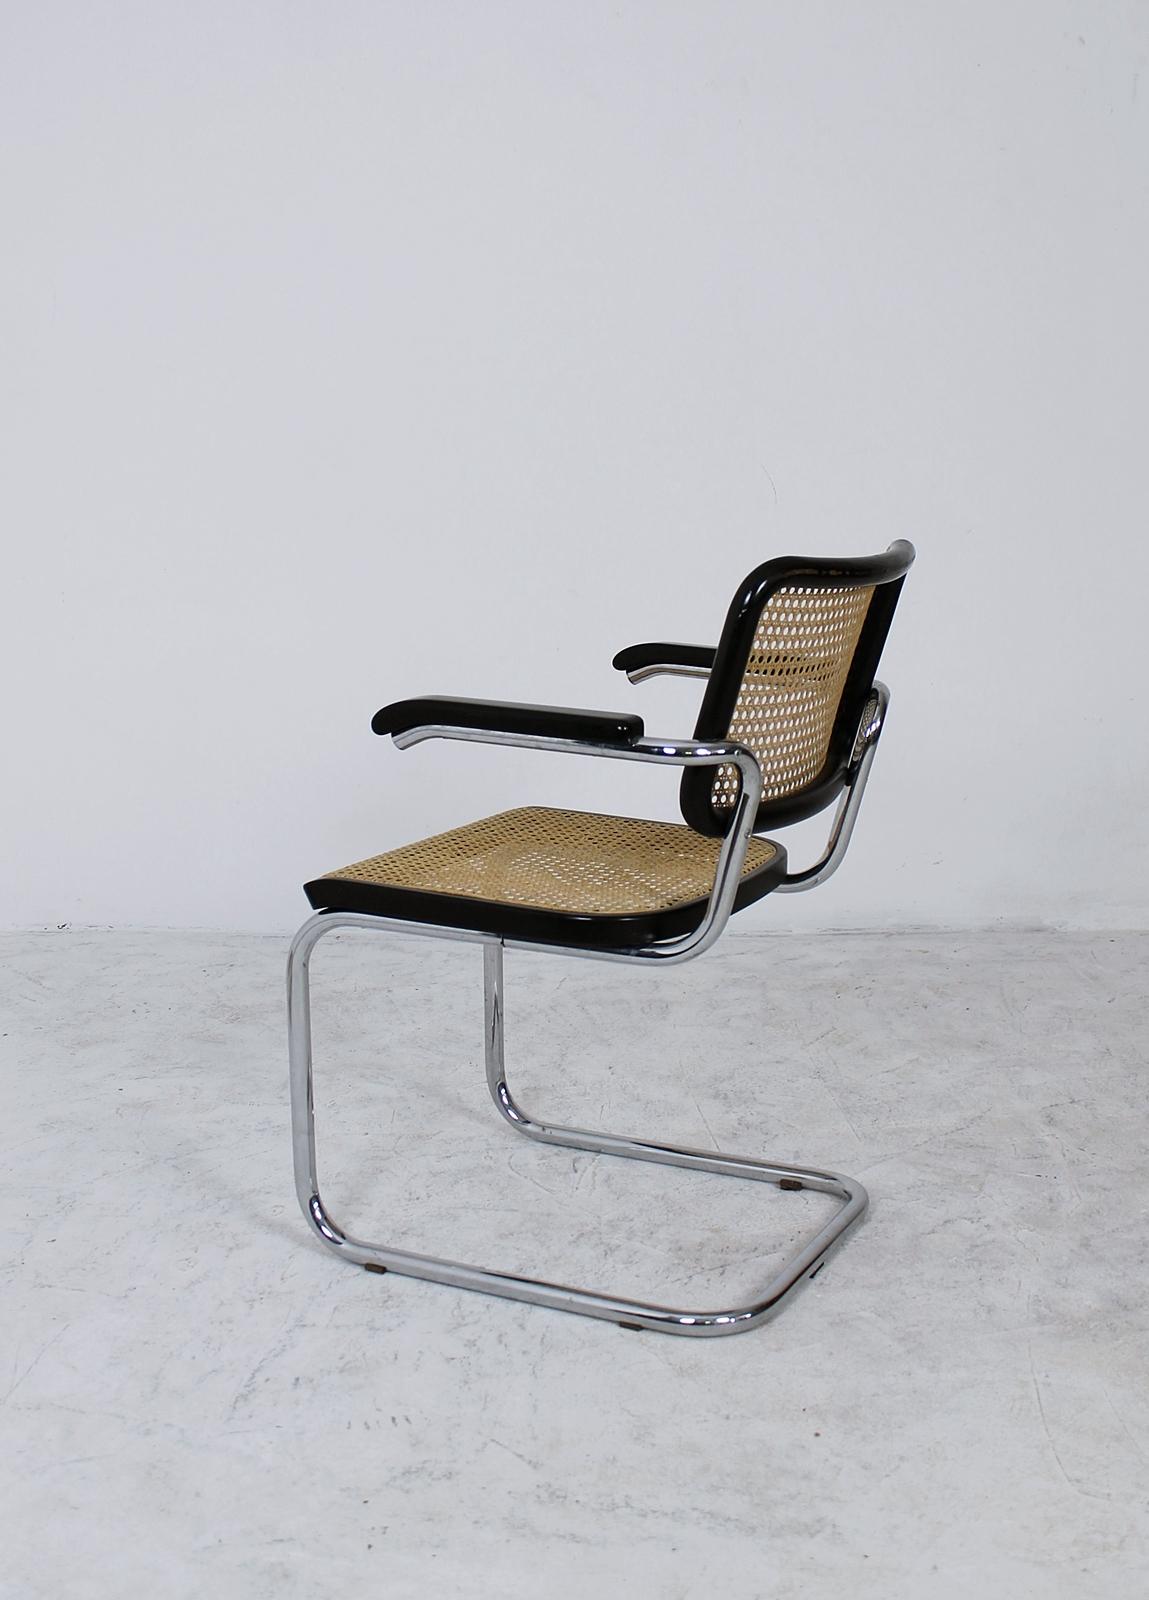 Steel Bauhaus Icon Thonet Cantilever Armchairs Model B64 by Marcel Breuer, 1927 For Sale